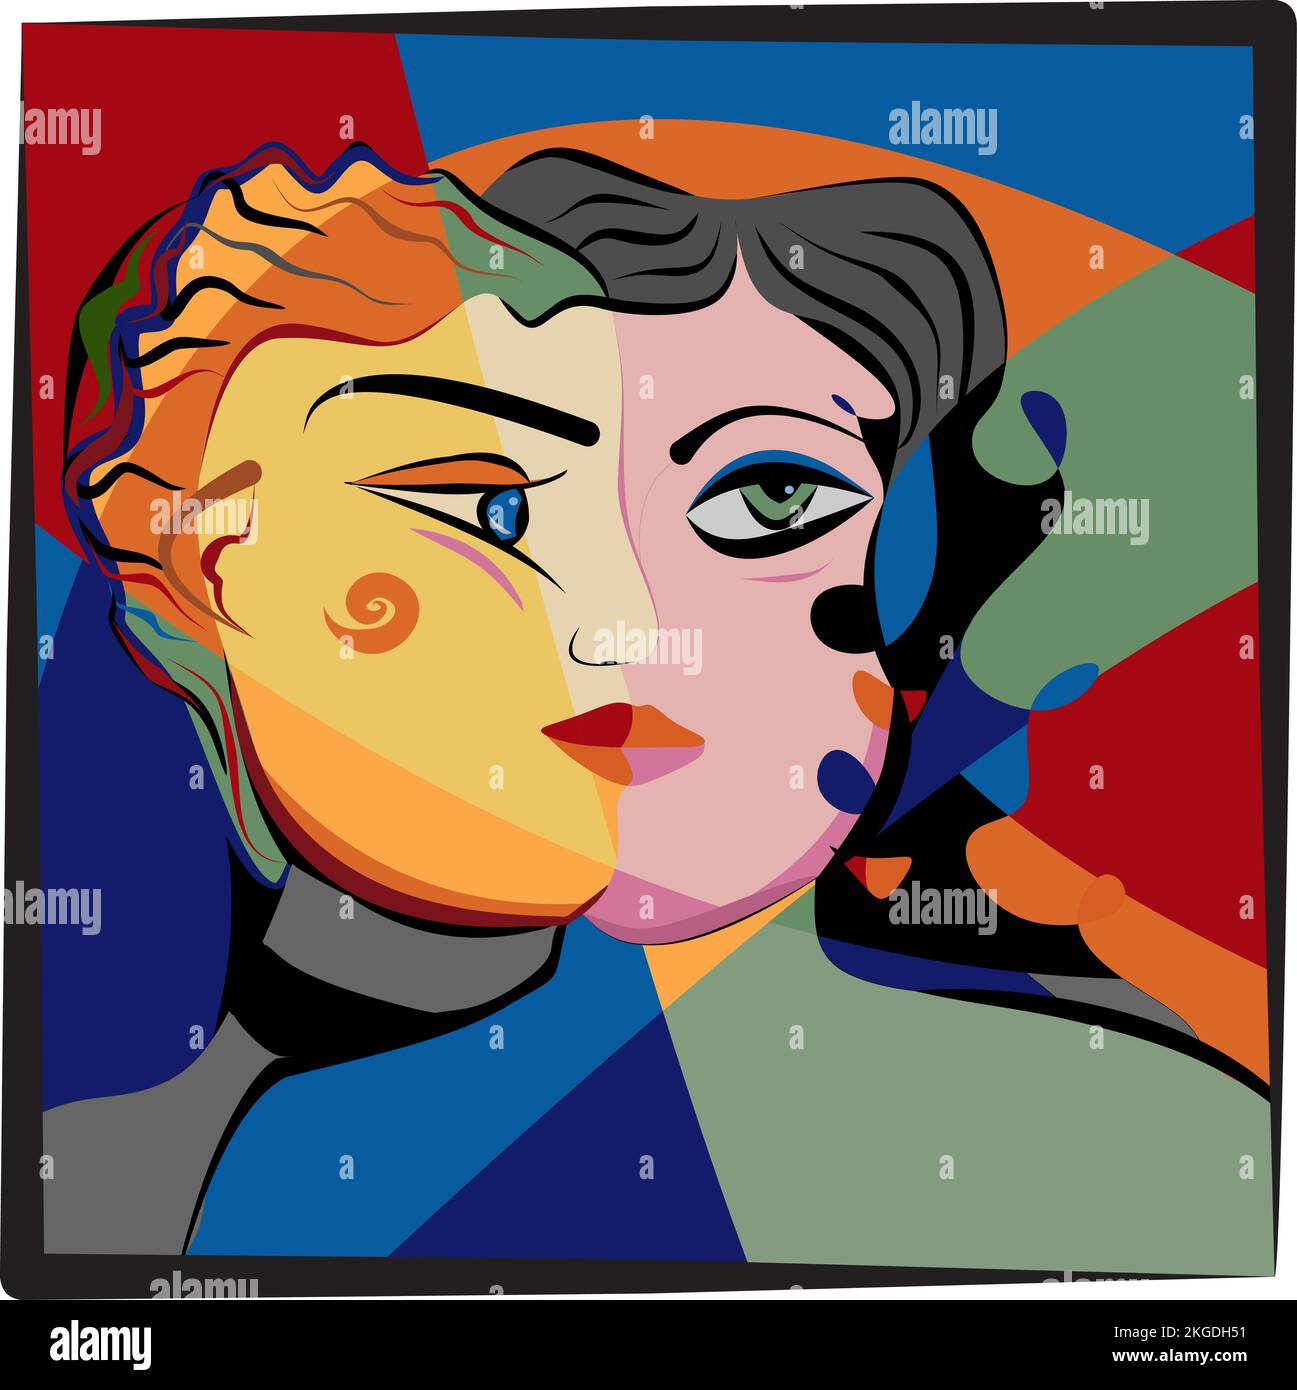 Colorful background, cubism art style,abstracts portraits Stock Vector